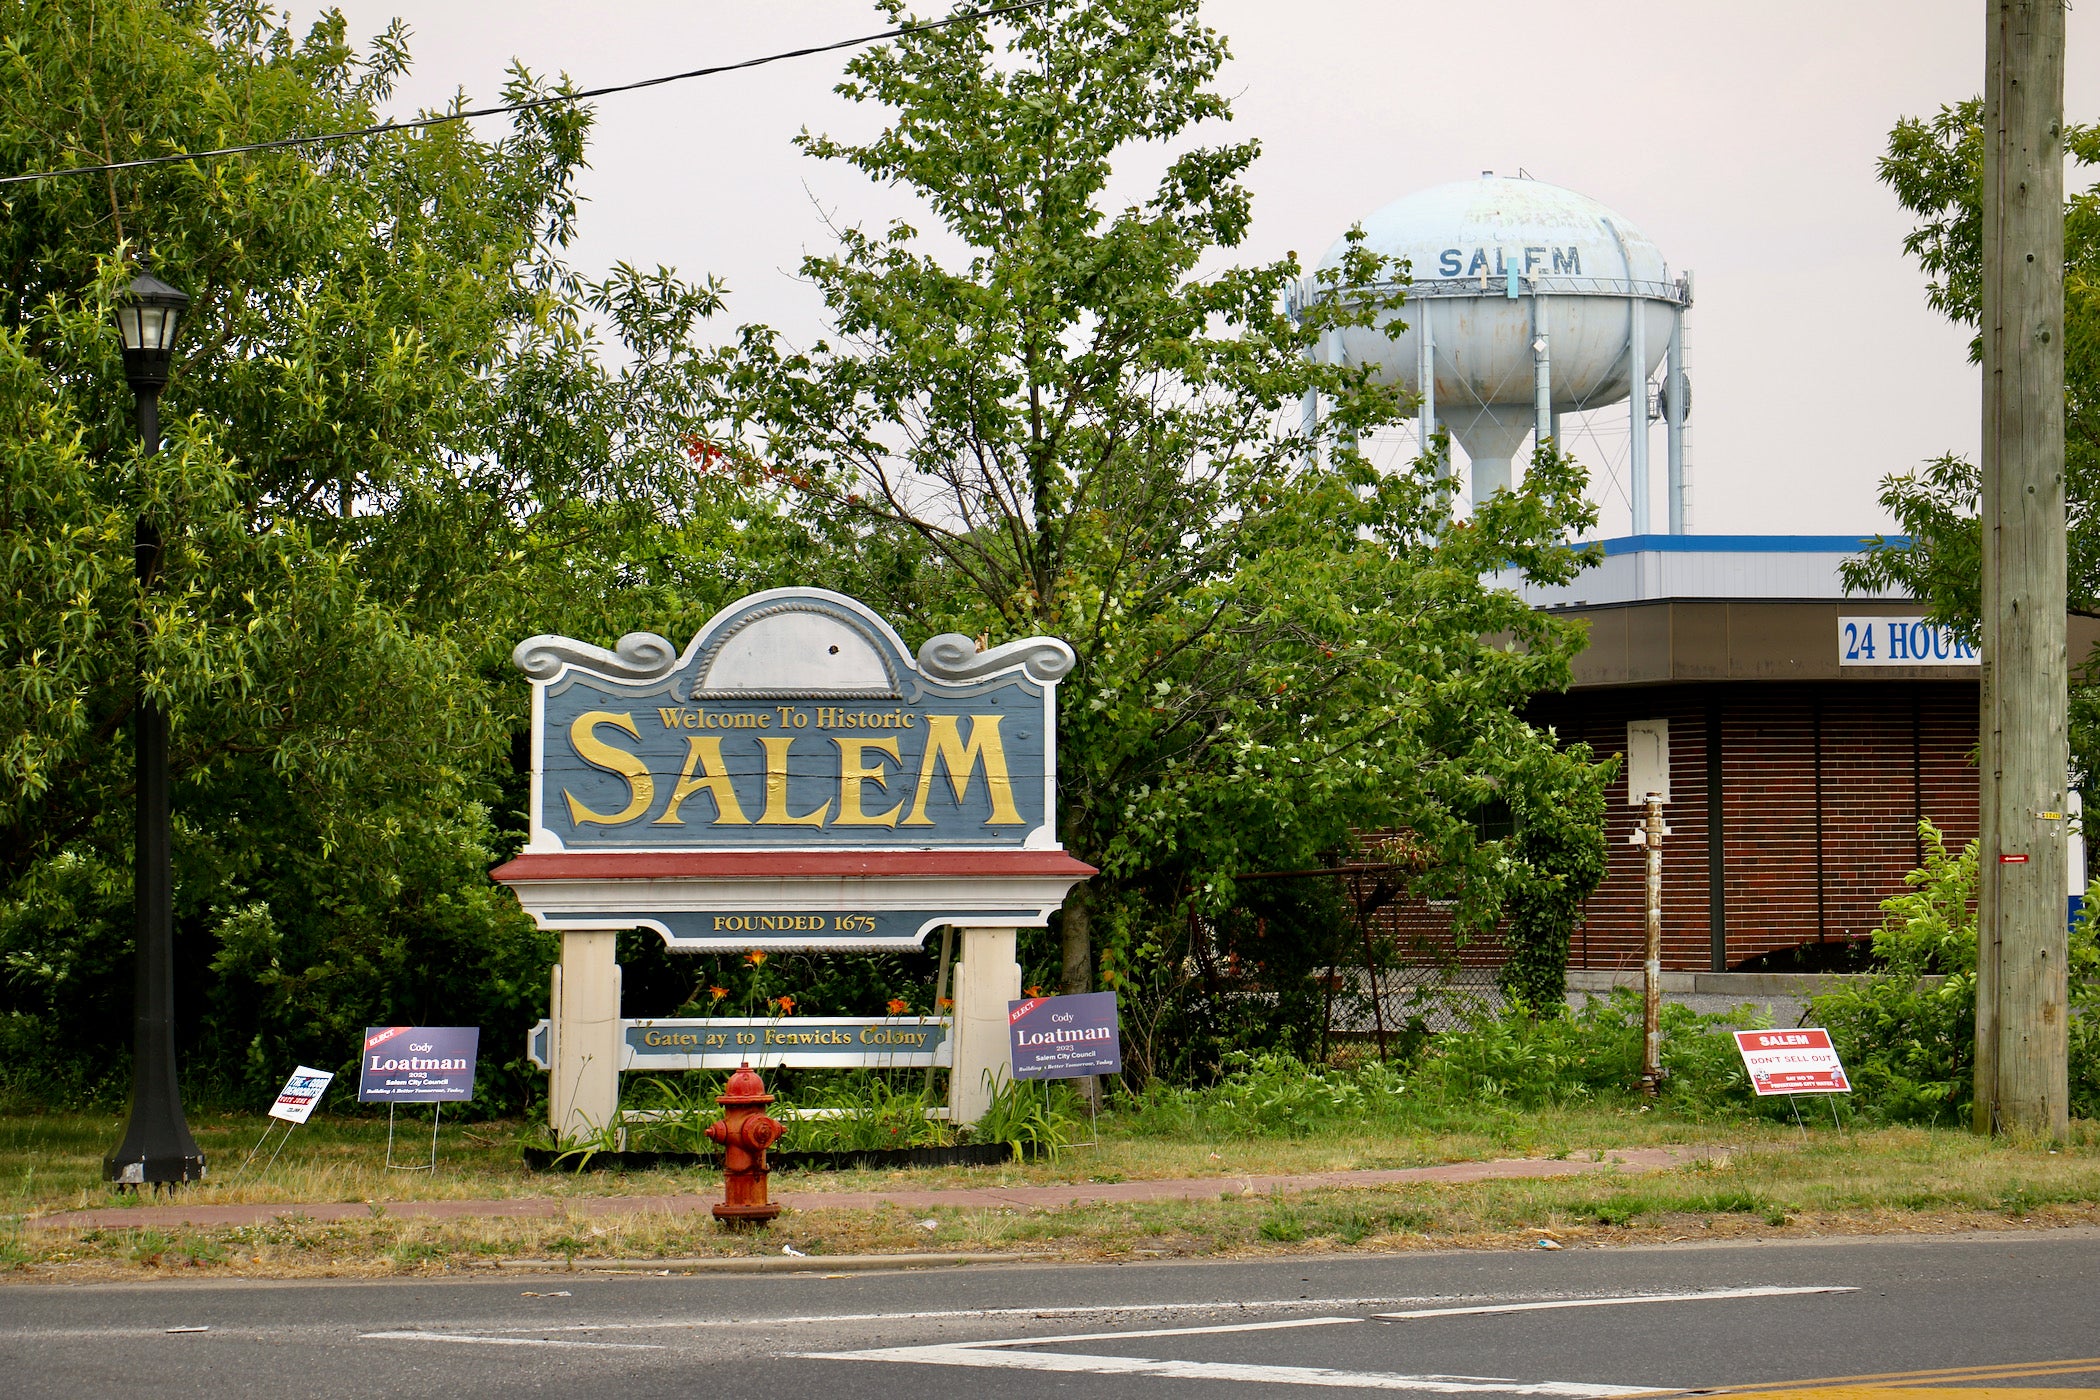 Salem City has finalized the sale of its water supply to New Jersey American Water